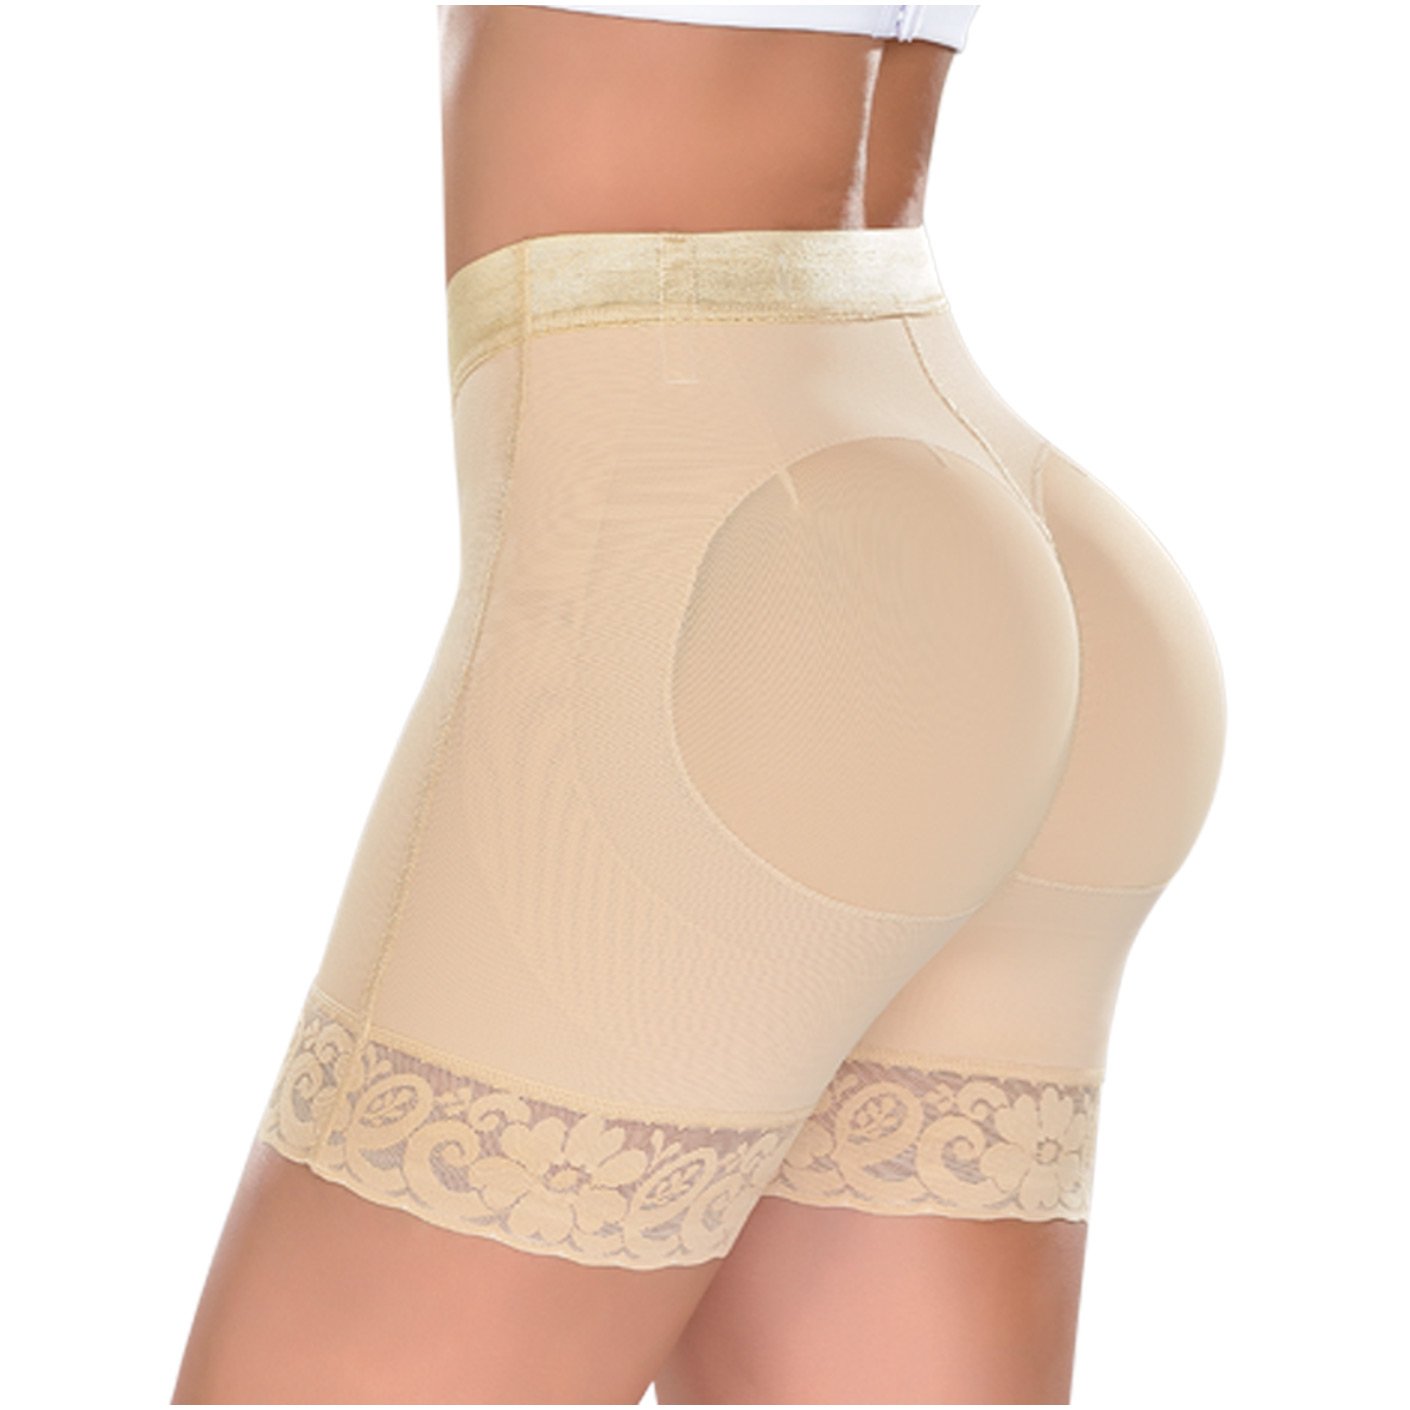 M&D Shapewear: 0216 - Extra High-Waisted Compression Shorts - Showmee Store